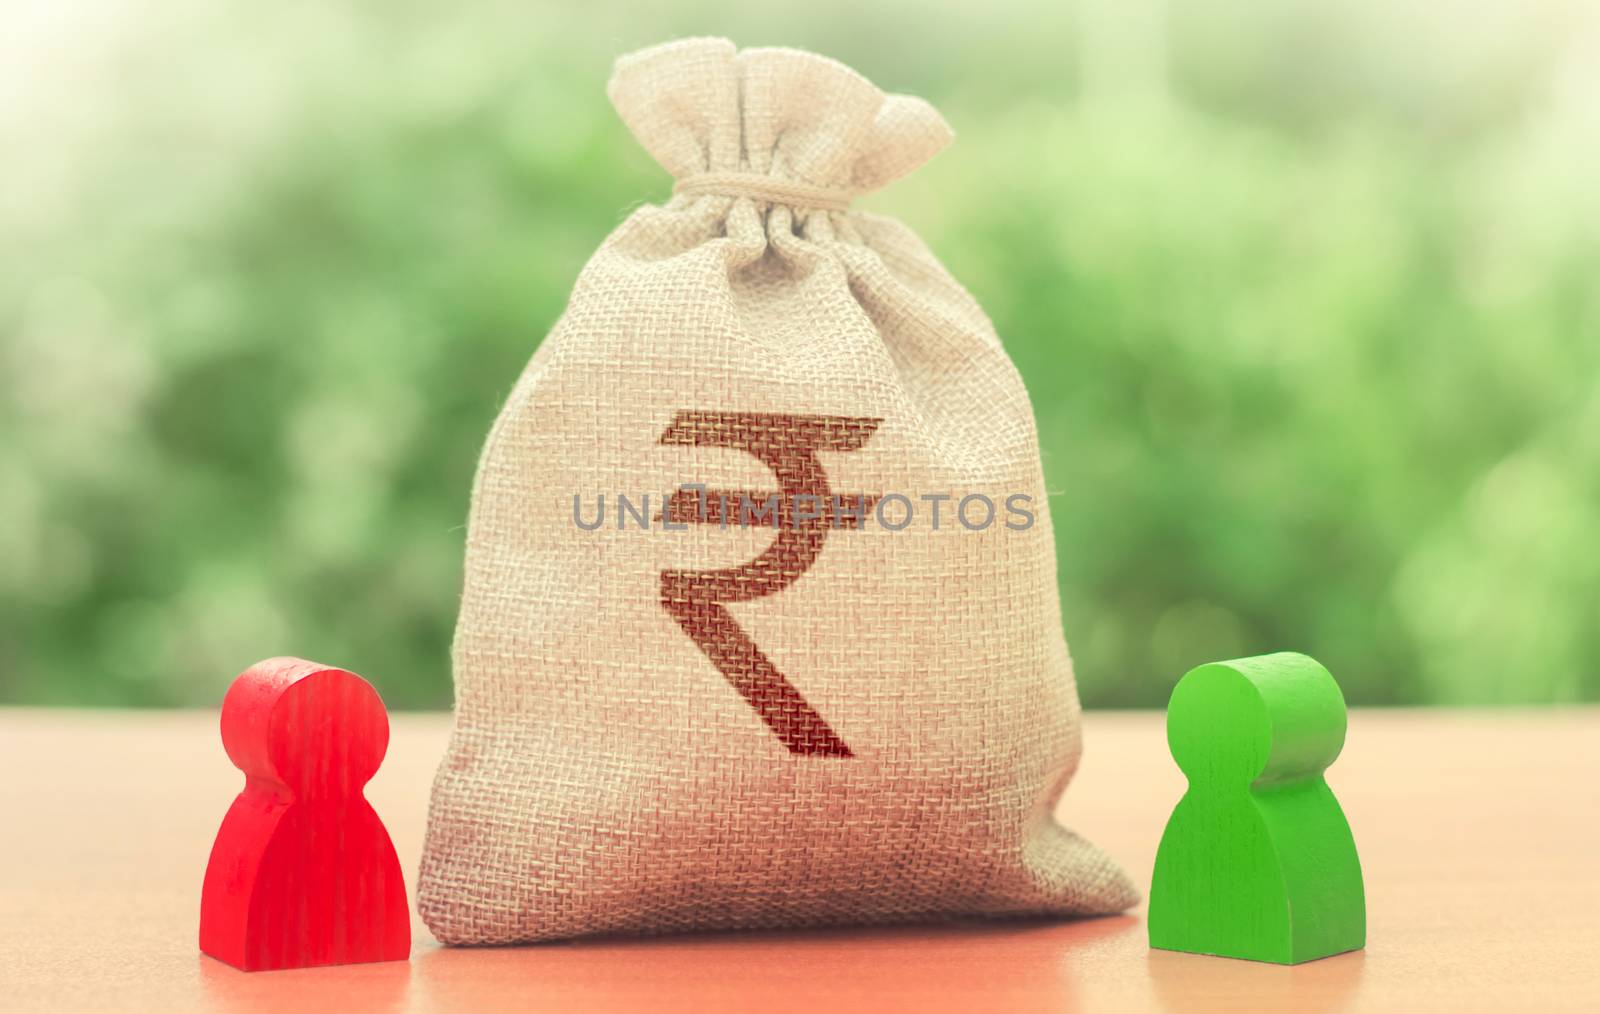 Indian rupee money bag and a deal between two persons. Business lending, leasing. Tender competitiona contract. Trade agreement. Negotiation process dealings. Dispute solution. Finance surety promise by iLixe48